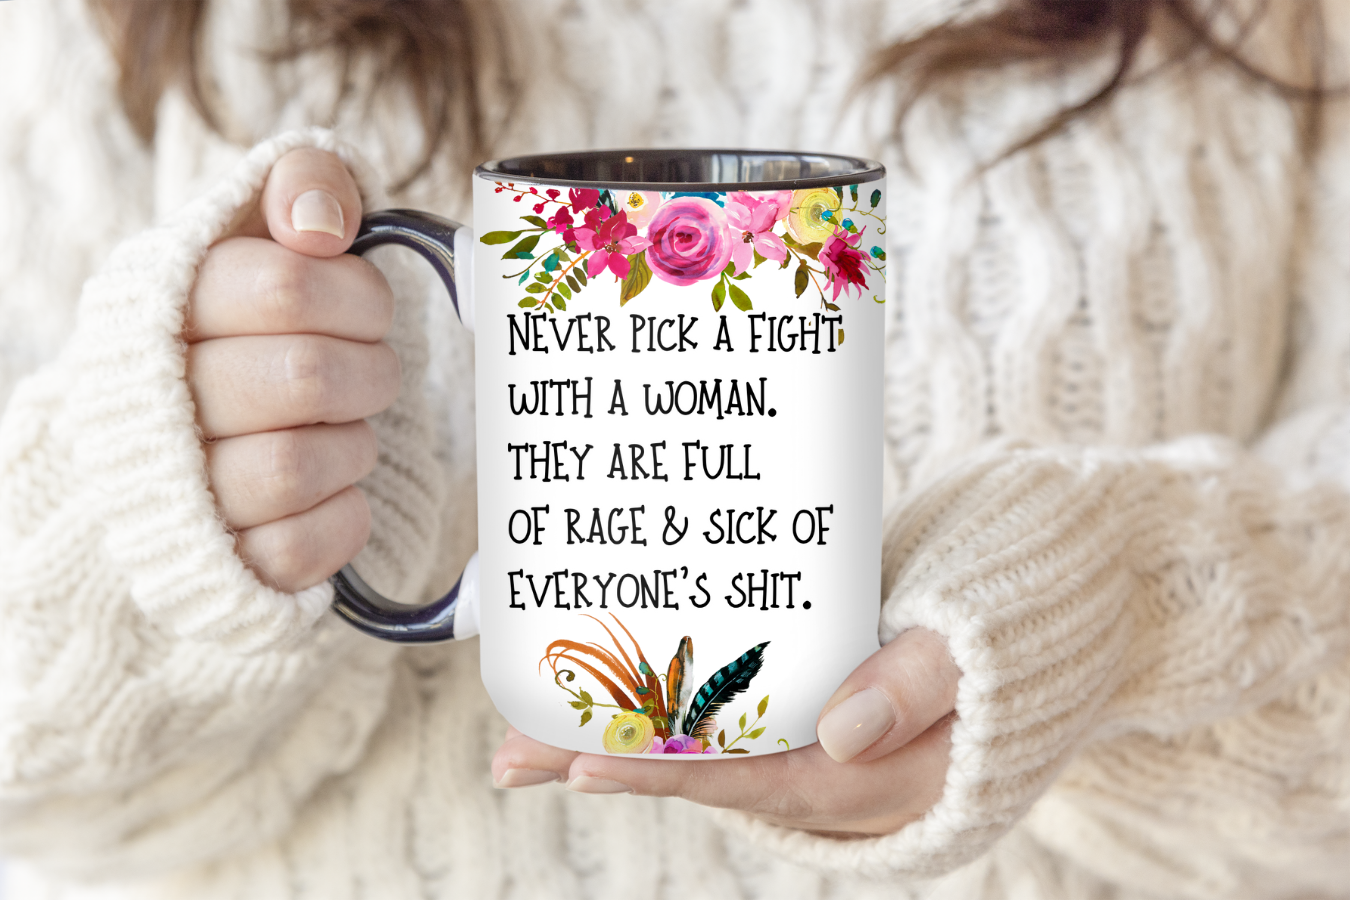 Never Pick A Fight With A Woman | Mug - The Pretty Things.ca